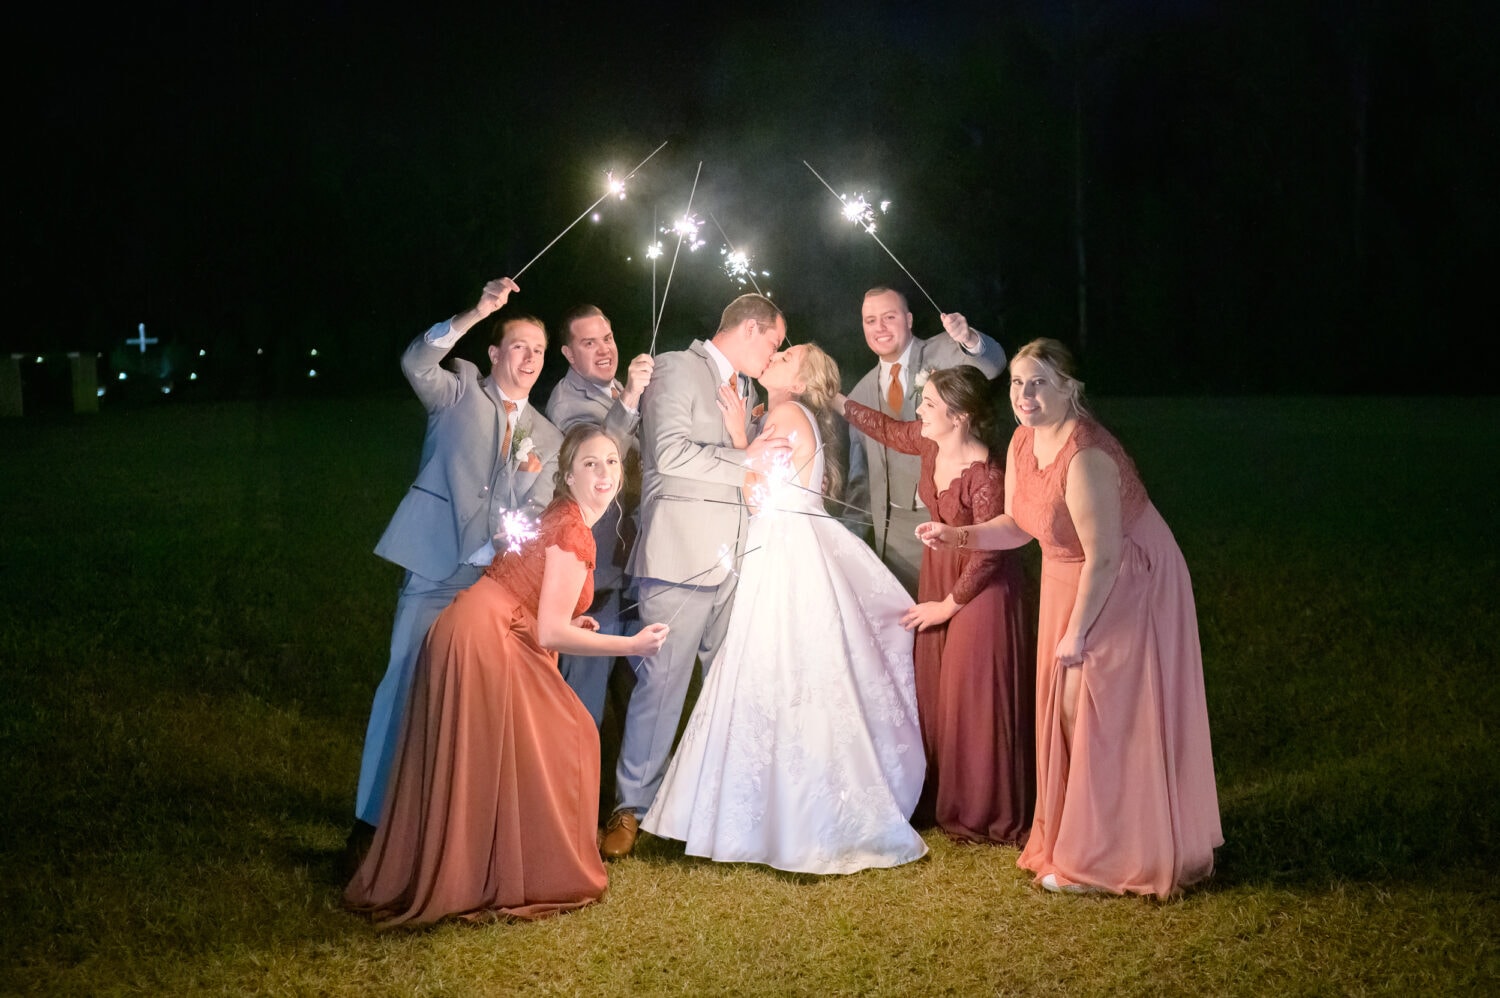 Holding sparklers around the bride and groom - The Blessed Barn